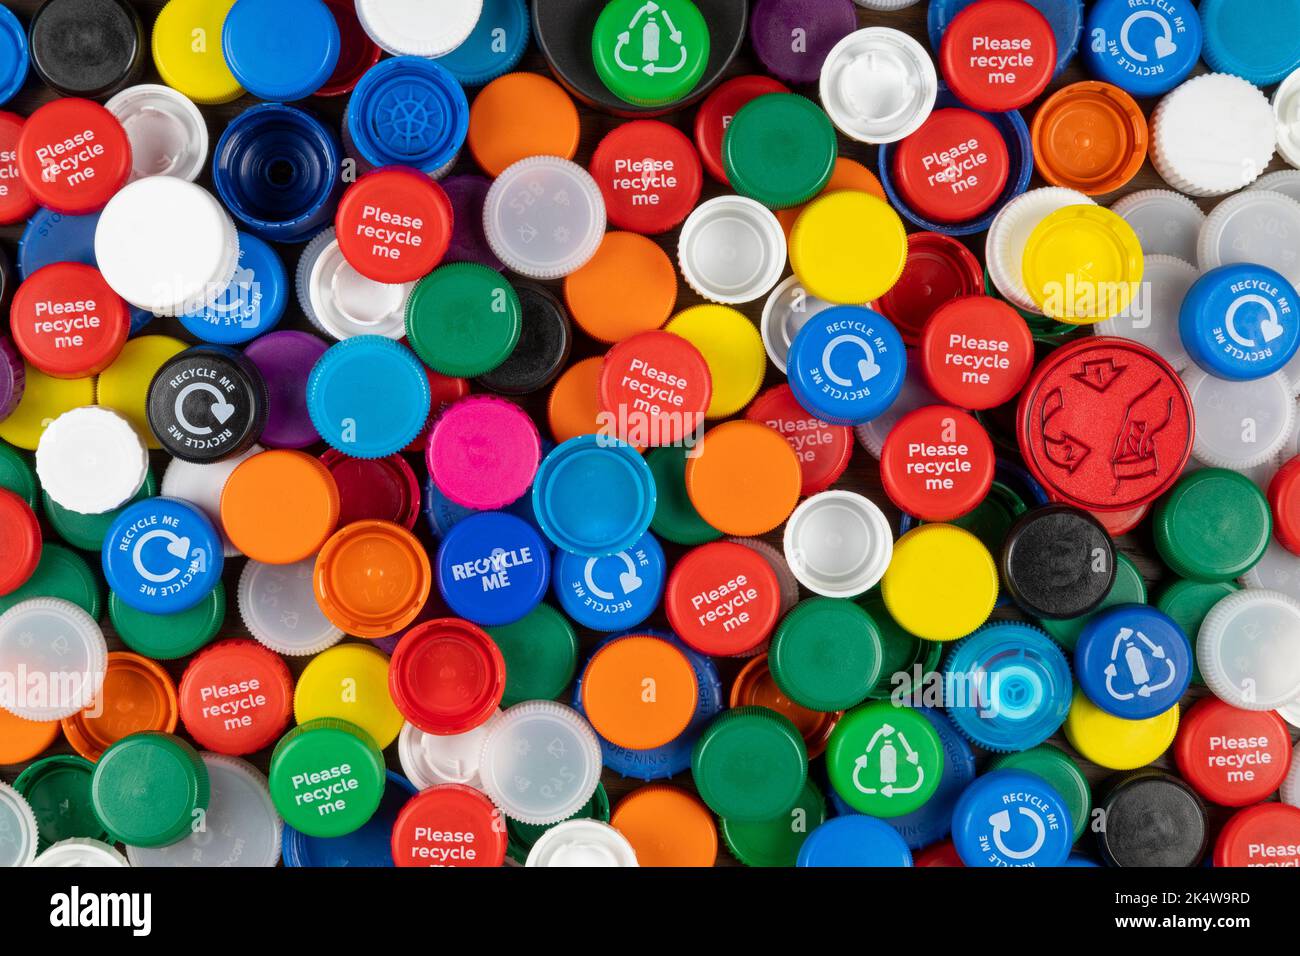 Colorful plastic bottle caps for recycling. Stock Photo